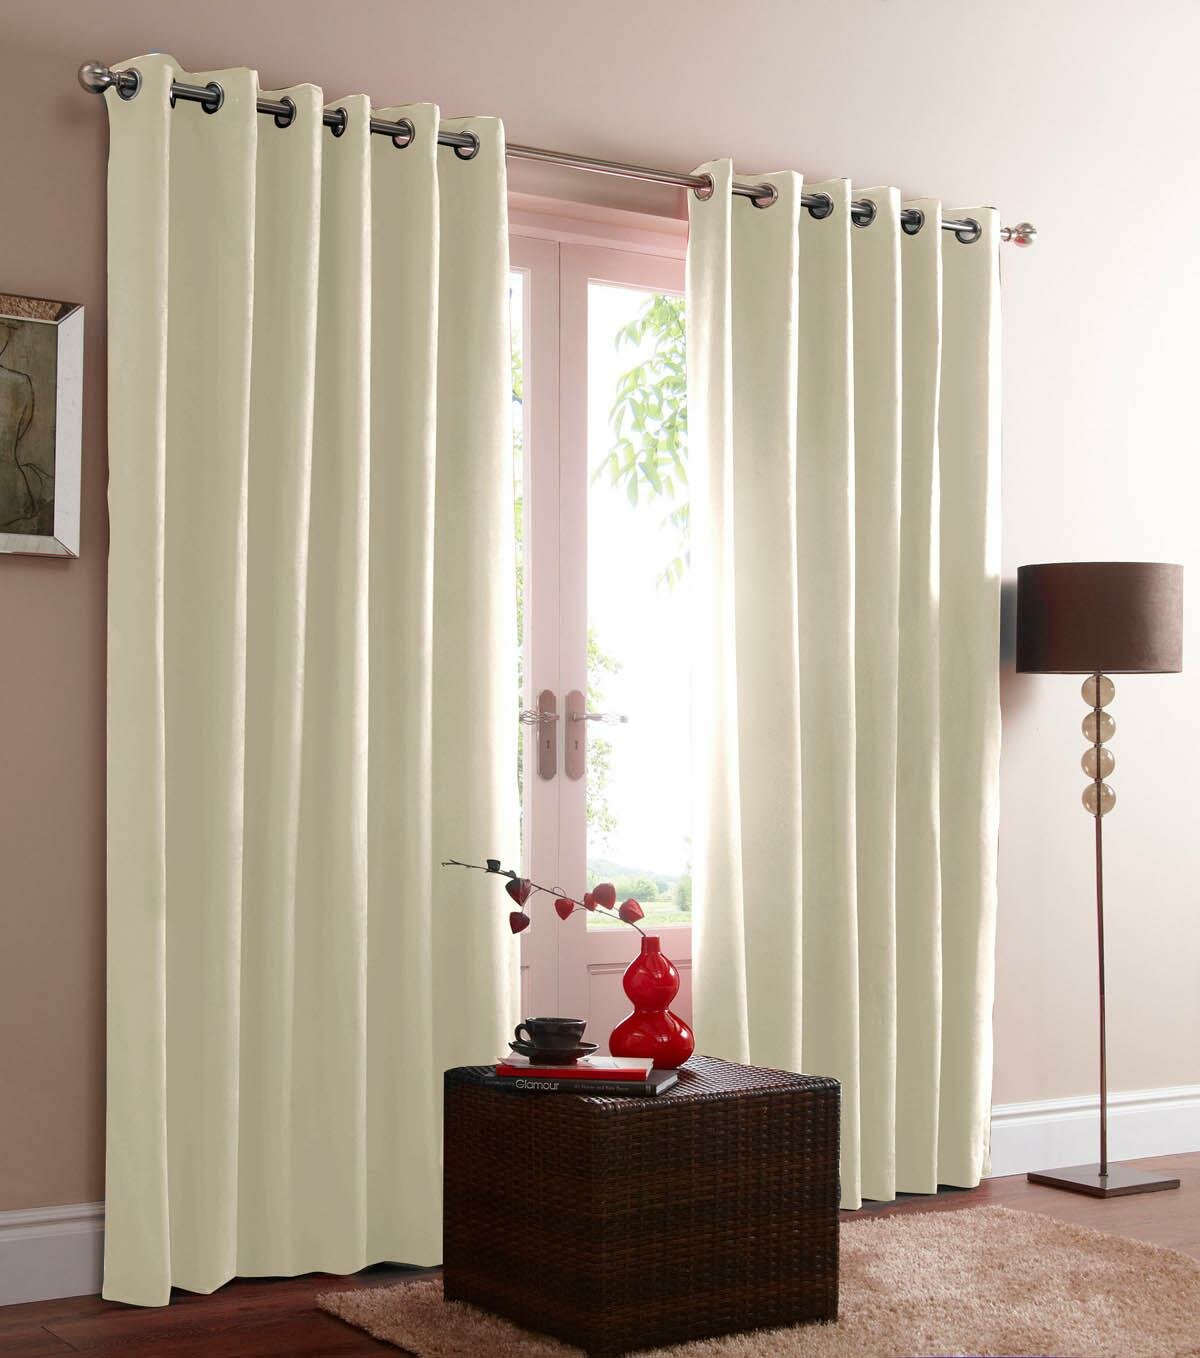 Cheap Blackout Curtains | Black Out Sheets | Blackout Lined Curtains